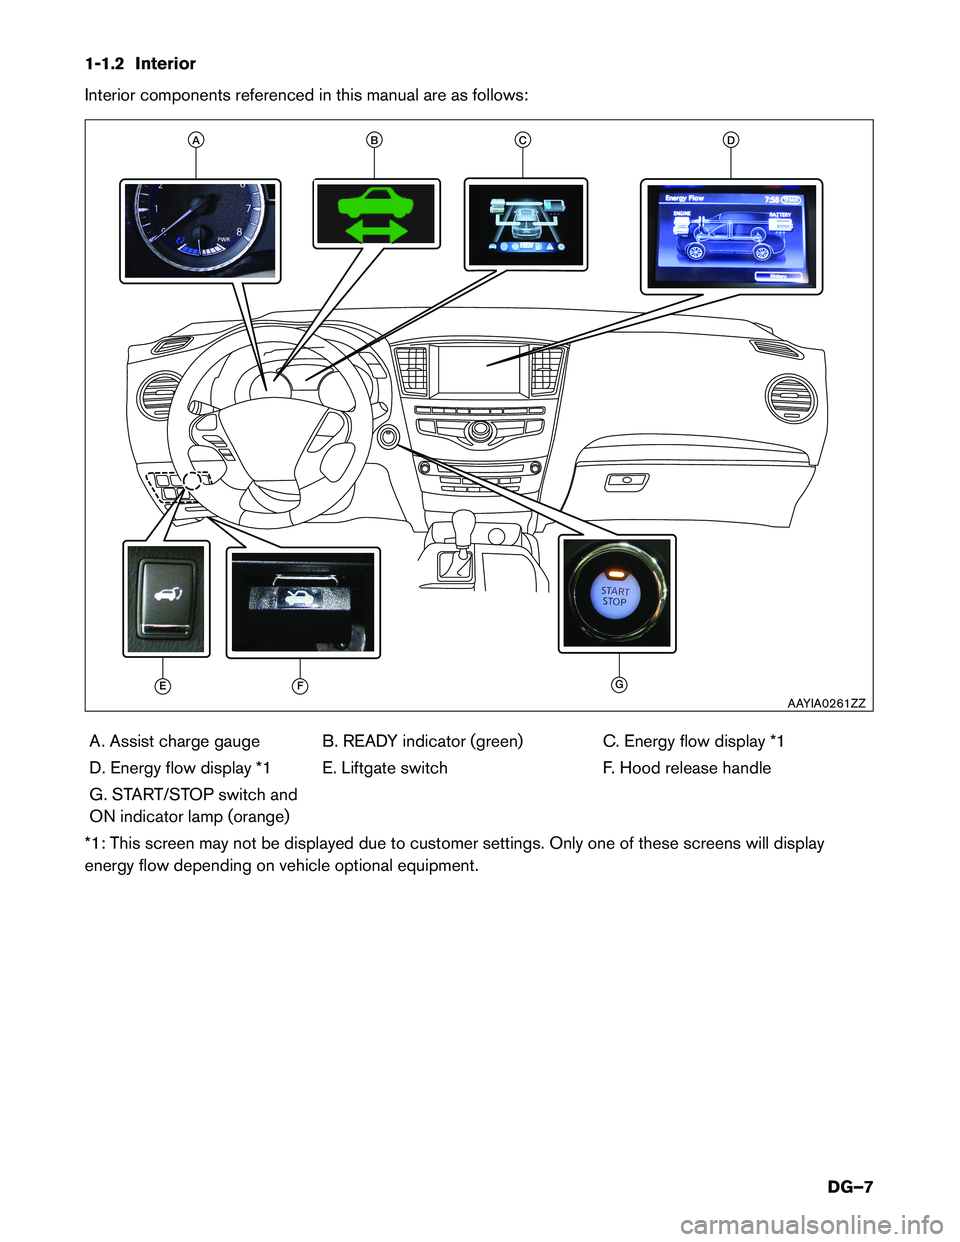 INFINITI QX60 HYBRID 2015  Dismantling Guide 1-1.2 Interior 
Interior components referenced in this manual are as follows:A. Assist charge gauge B. READY indicator (green) C. Energy flow display *1 
D. Energy flow display *1 E. Liftgate switch F